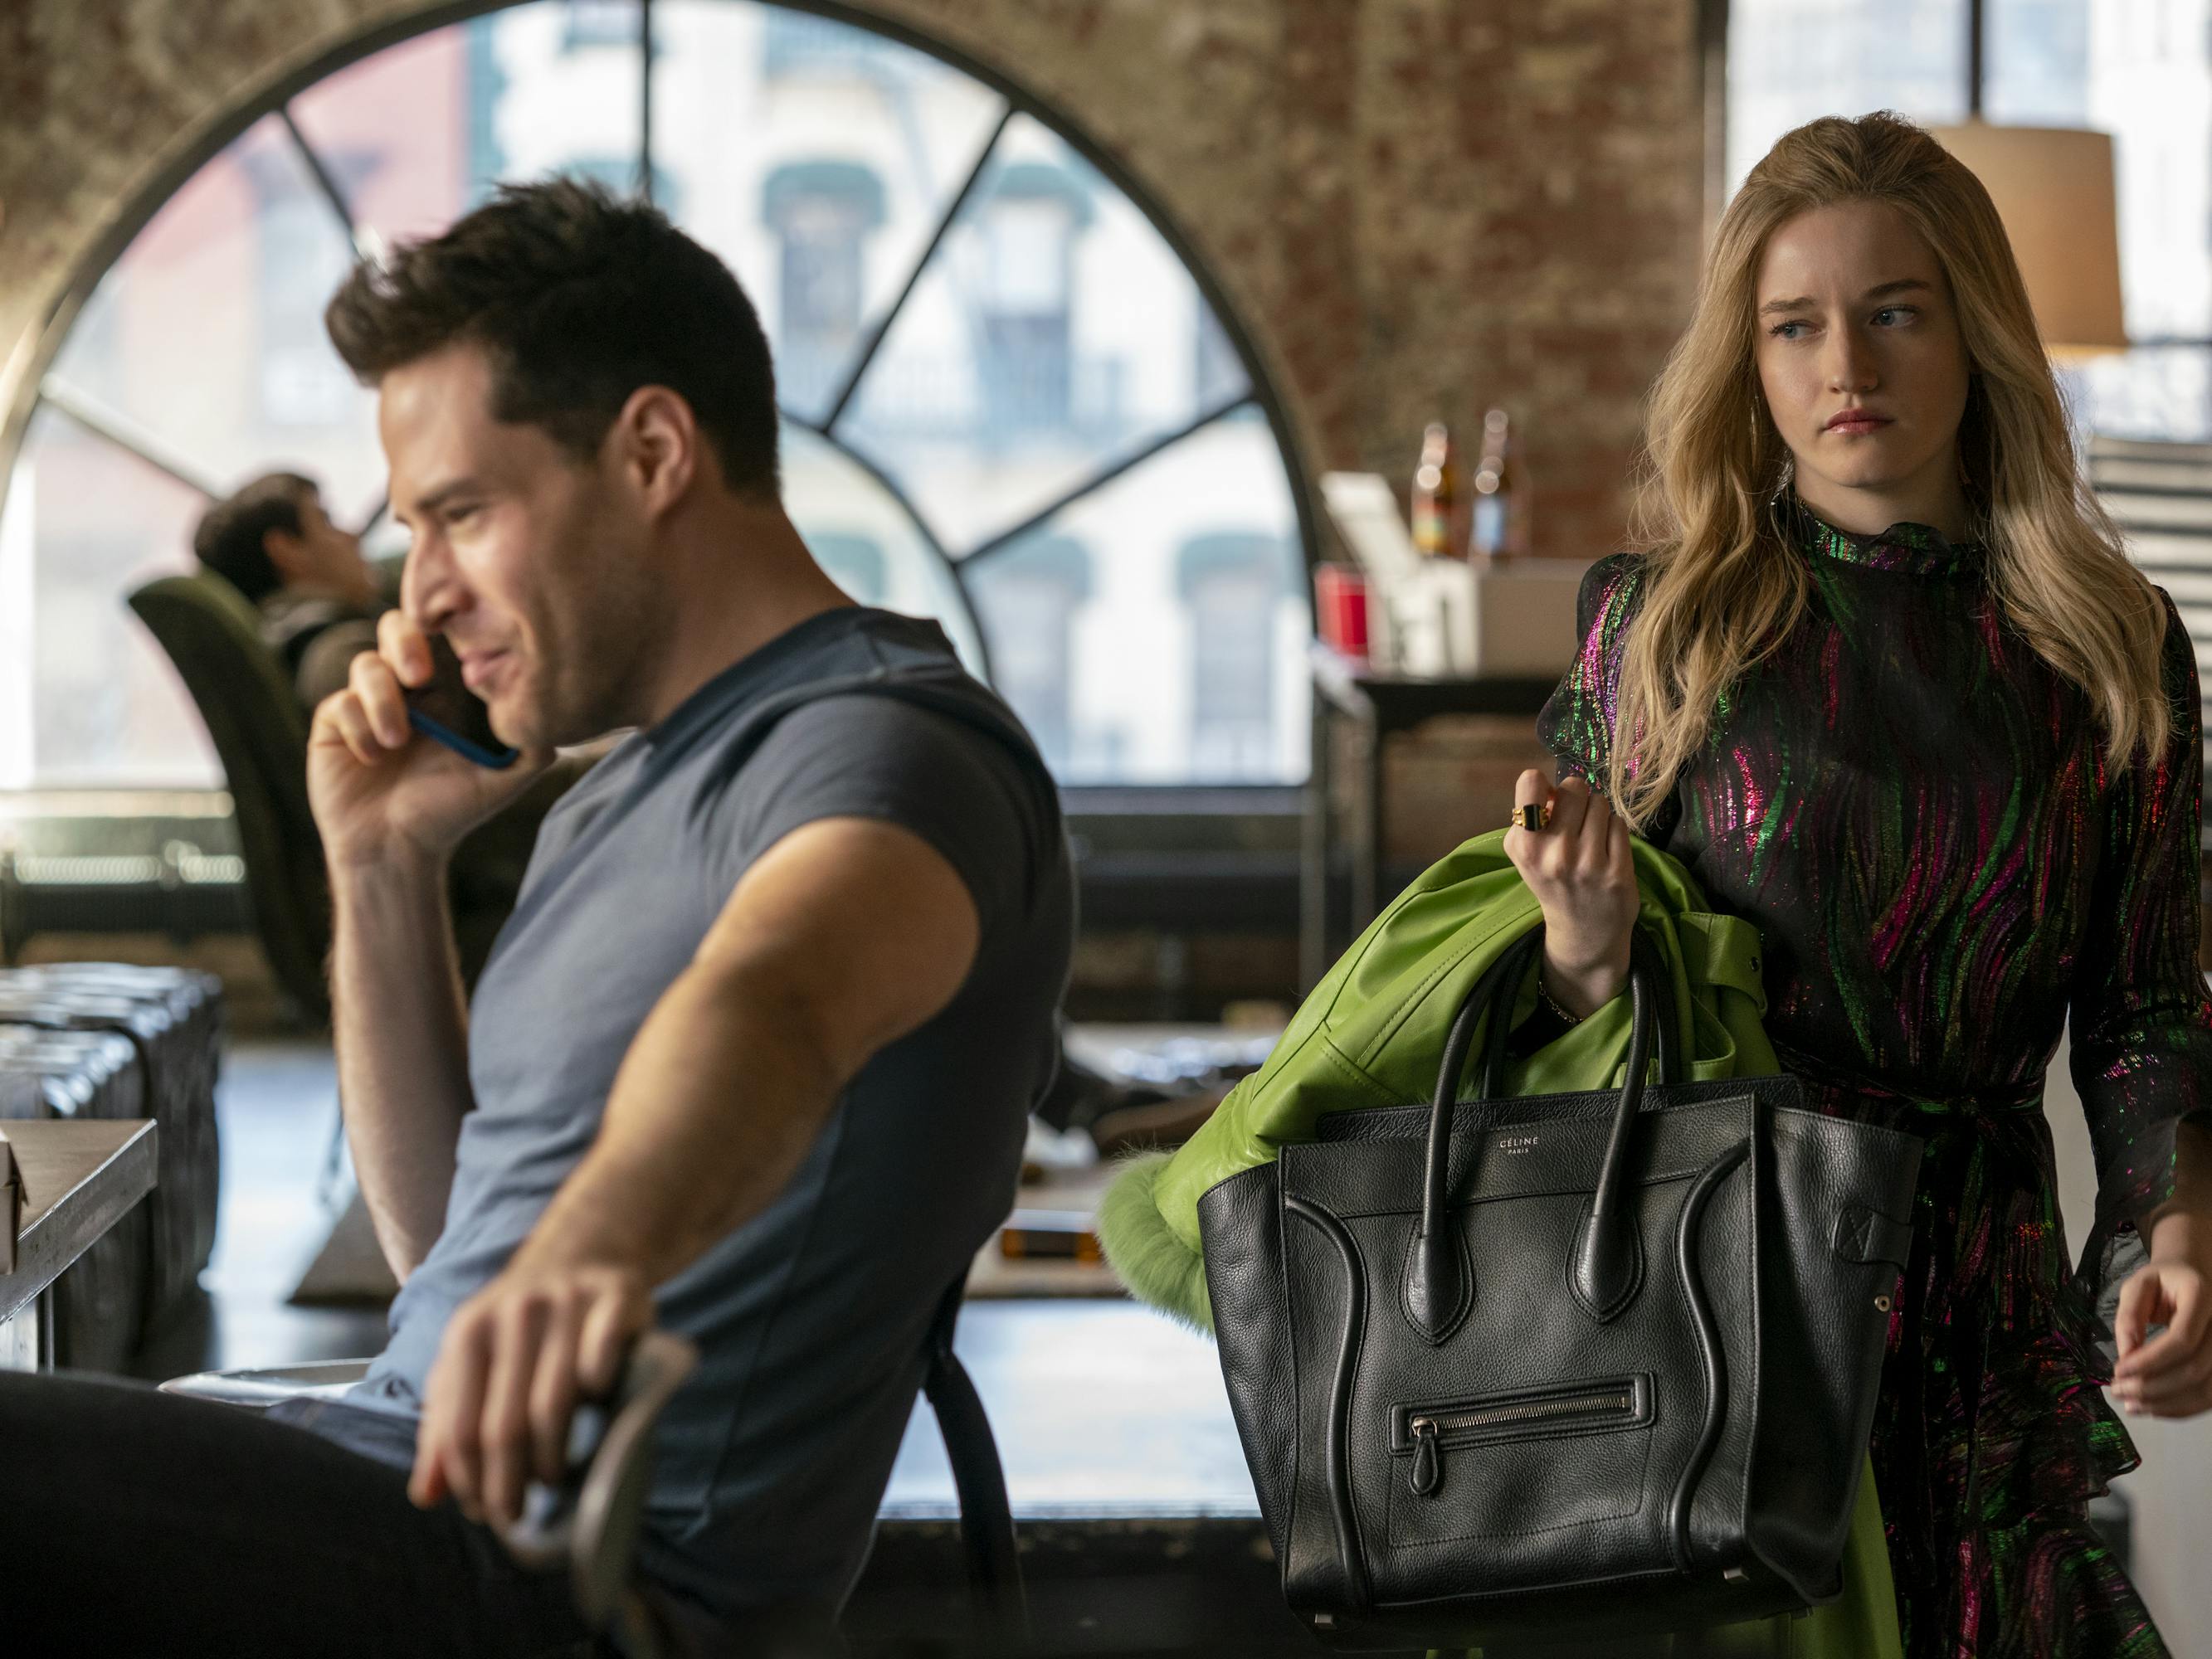 Ben Rappaport and Julia Garner. Rappaport wears a grey t-shirt and talks on the phone with a smug expression. Garner carries a black Celine back and looks disgusted.